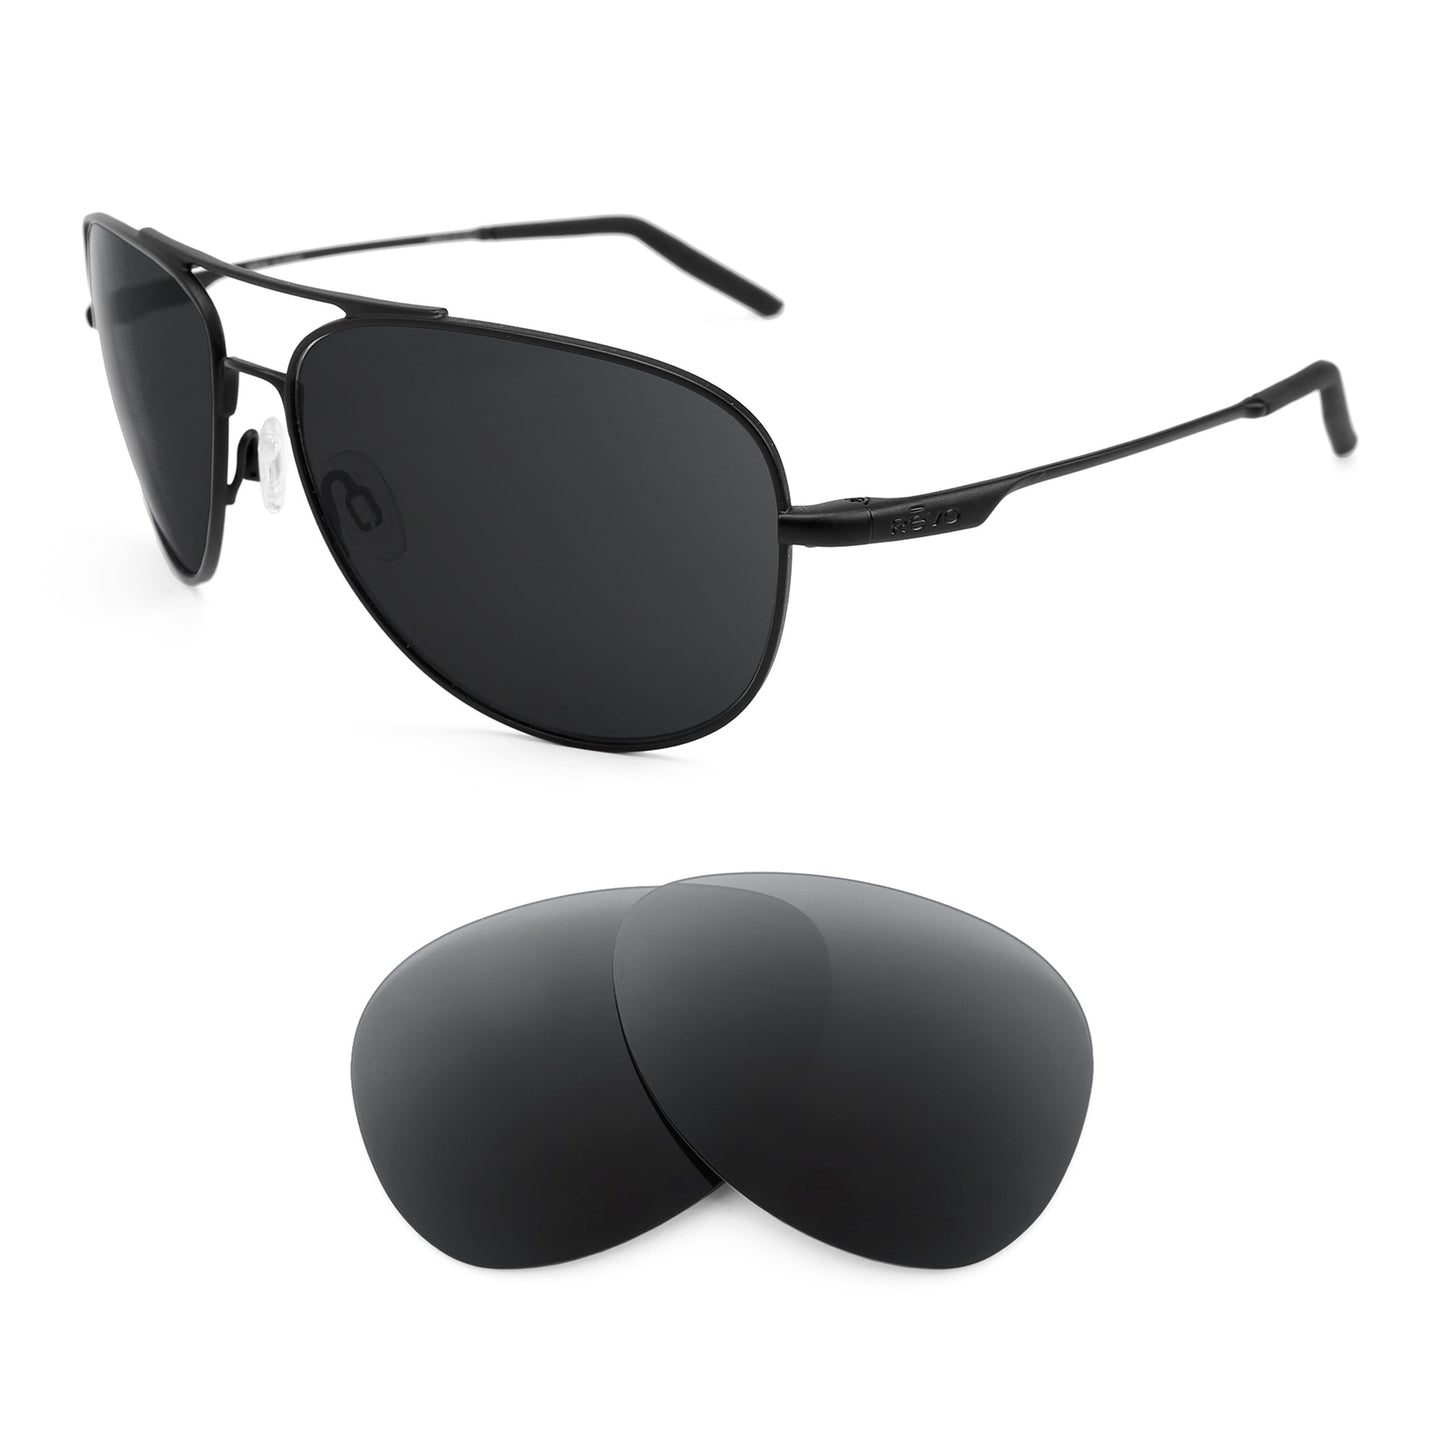 Revo Windspeed RE3087 sunglasses with replacement lenses